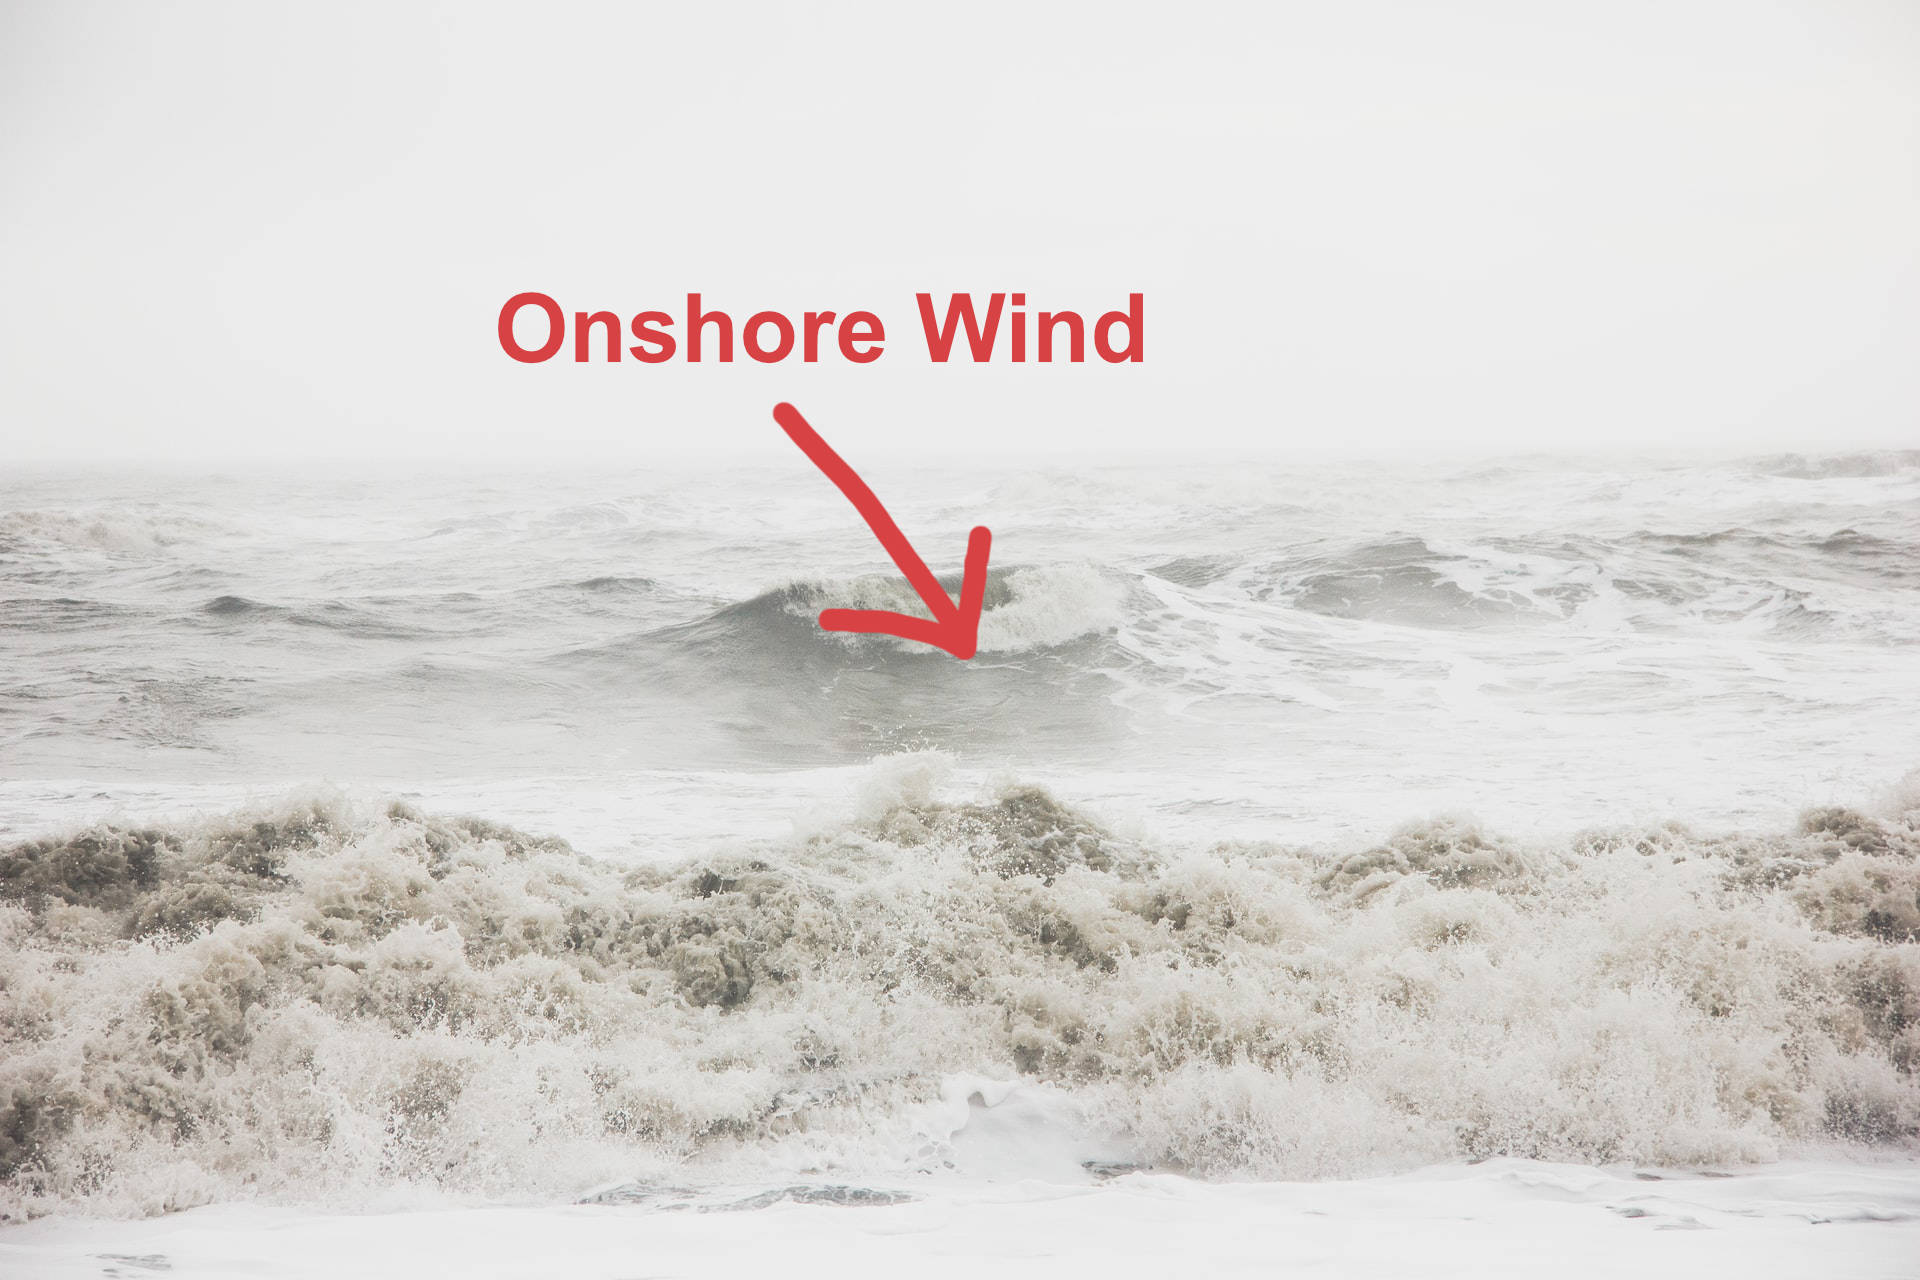 Onshore Wind, Choppy Conditions